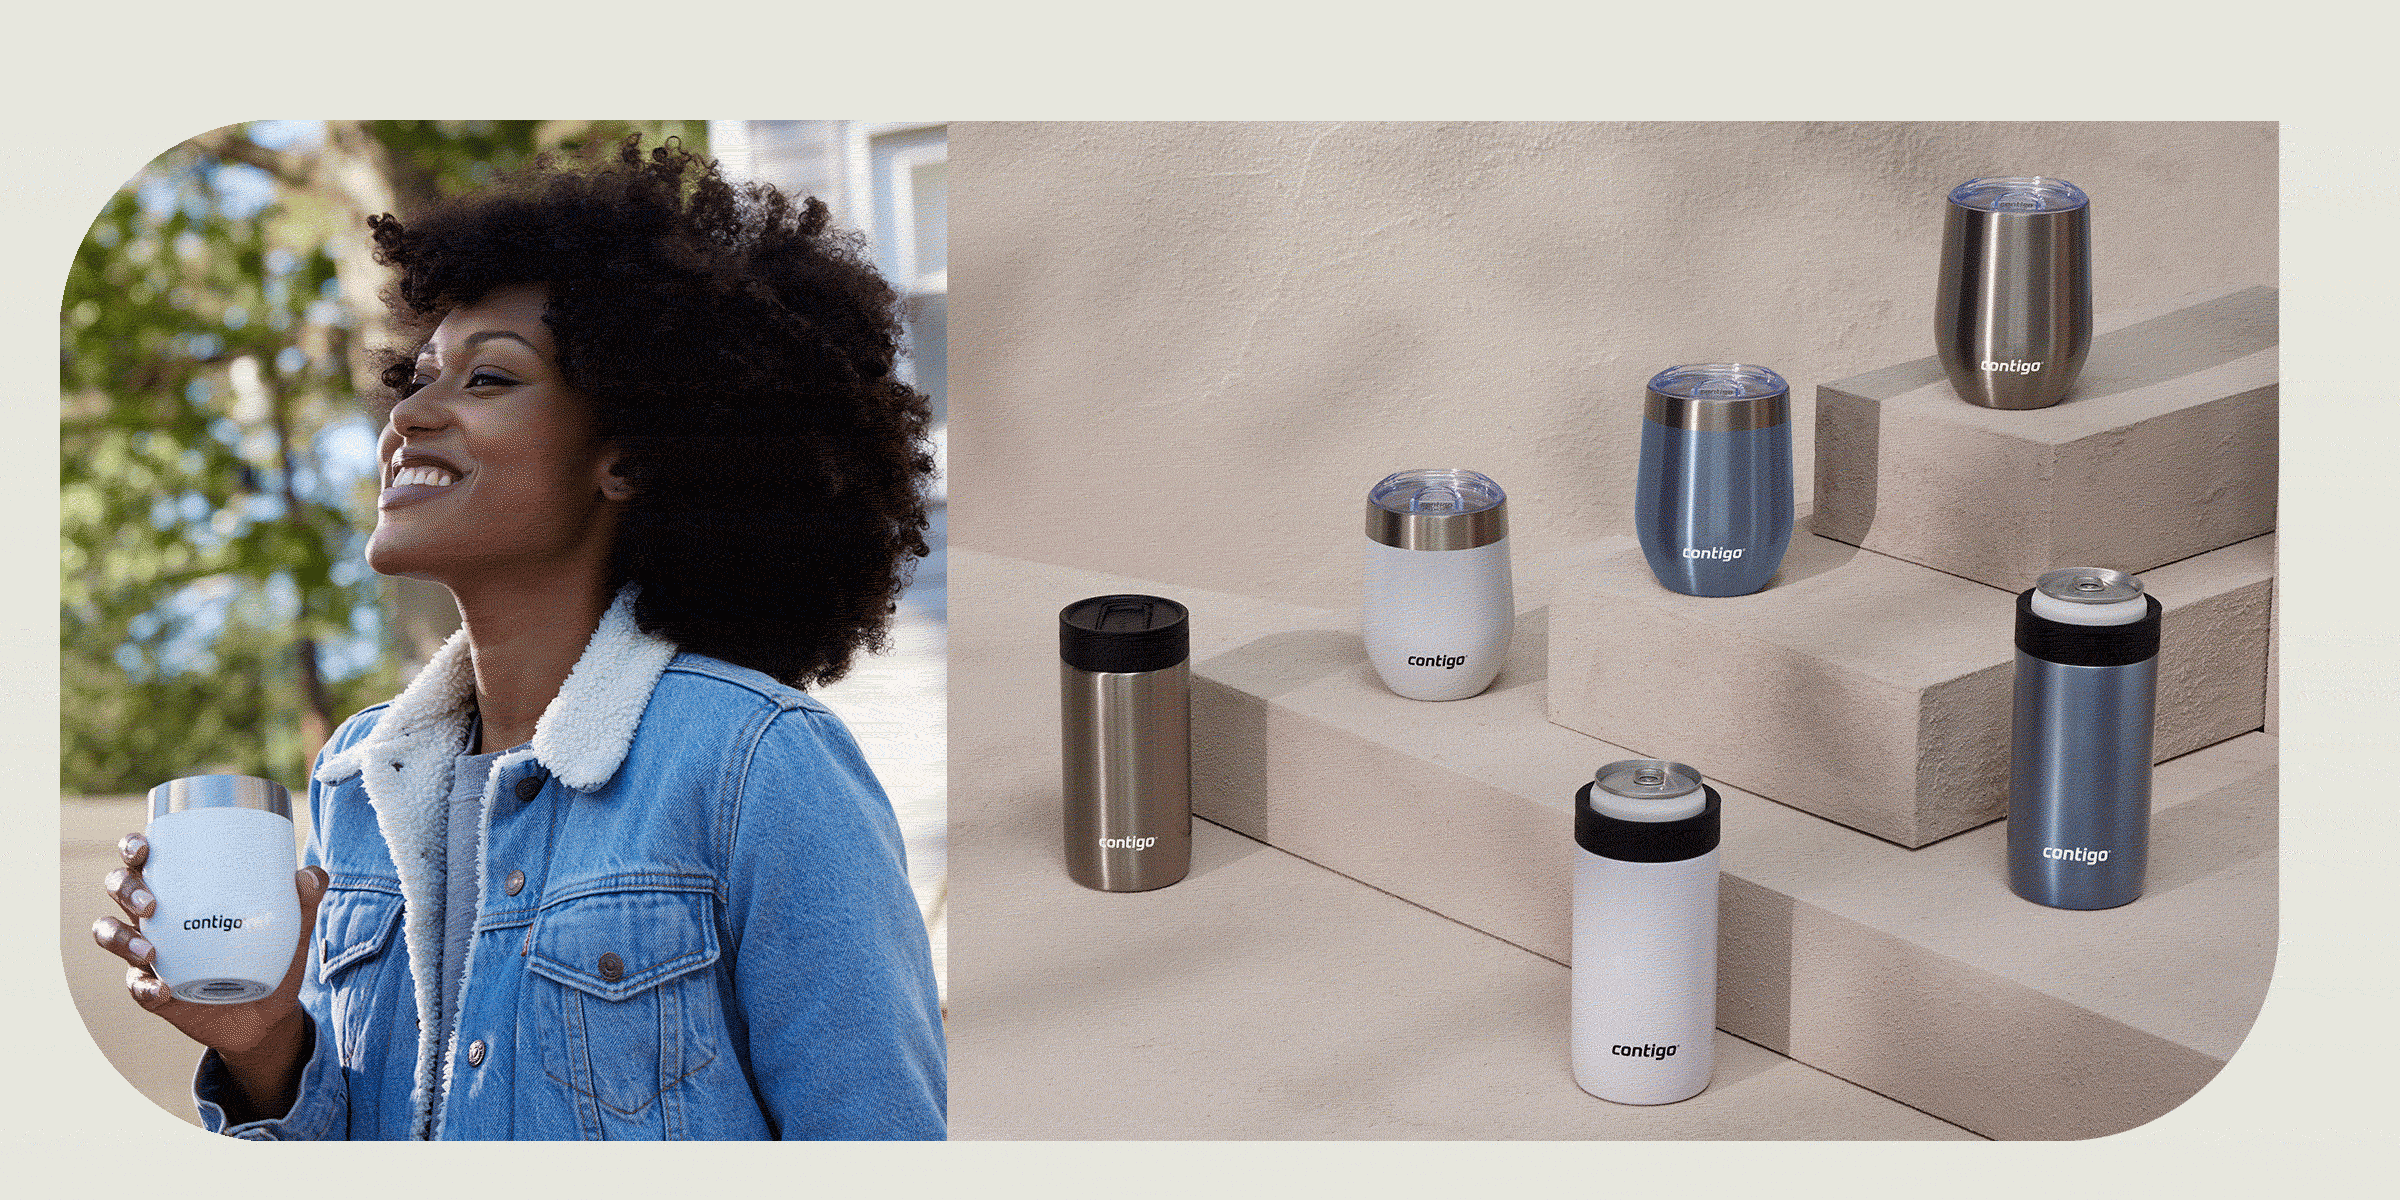 A collection of insulated stainless steel mugs and cups for drinking on the go